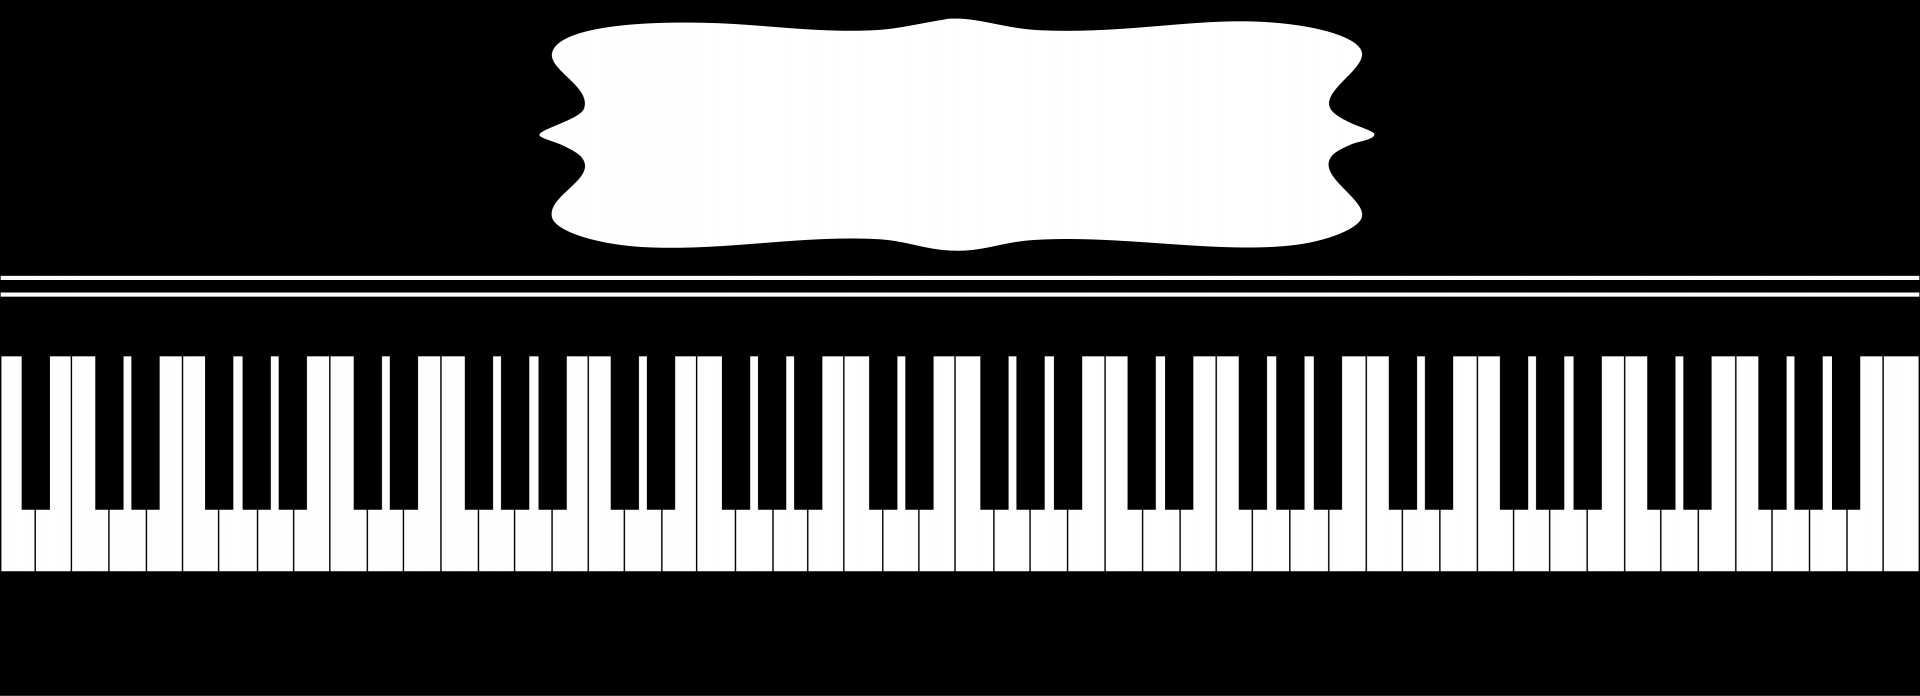 Piano Keyboard With Frame